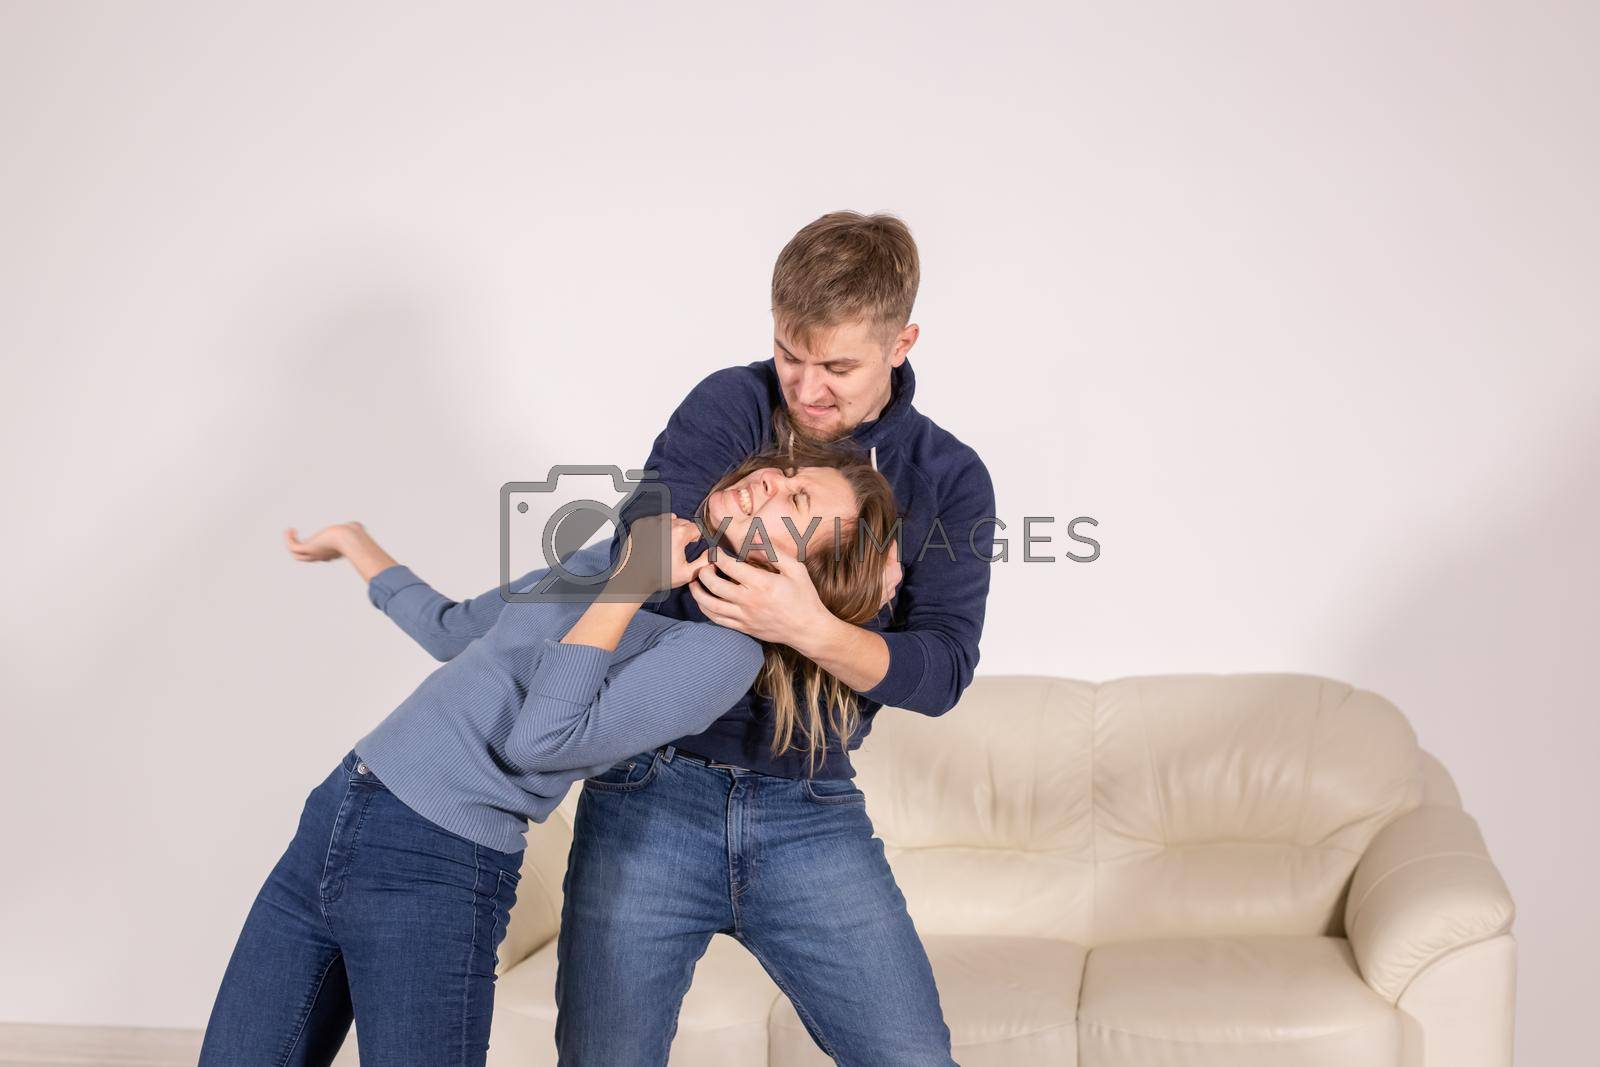 Royalty free image of people, abuse and violence concept - agressive man strangling his wife by Satura86